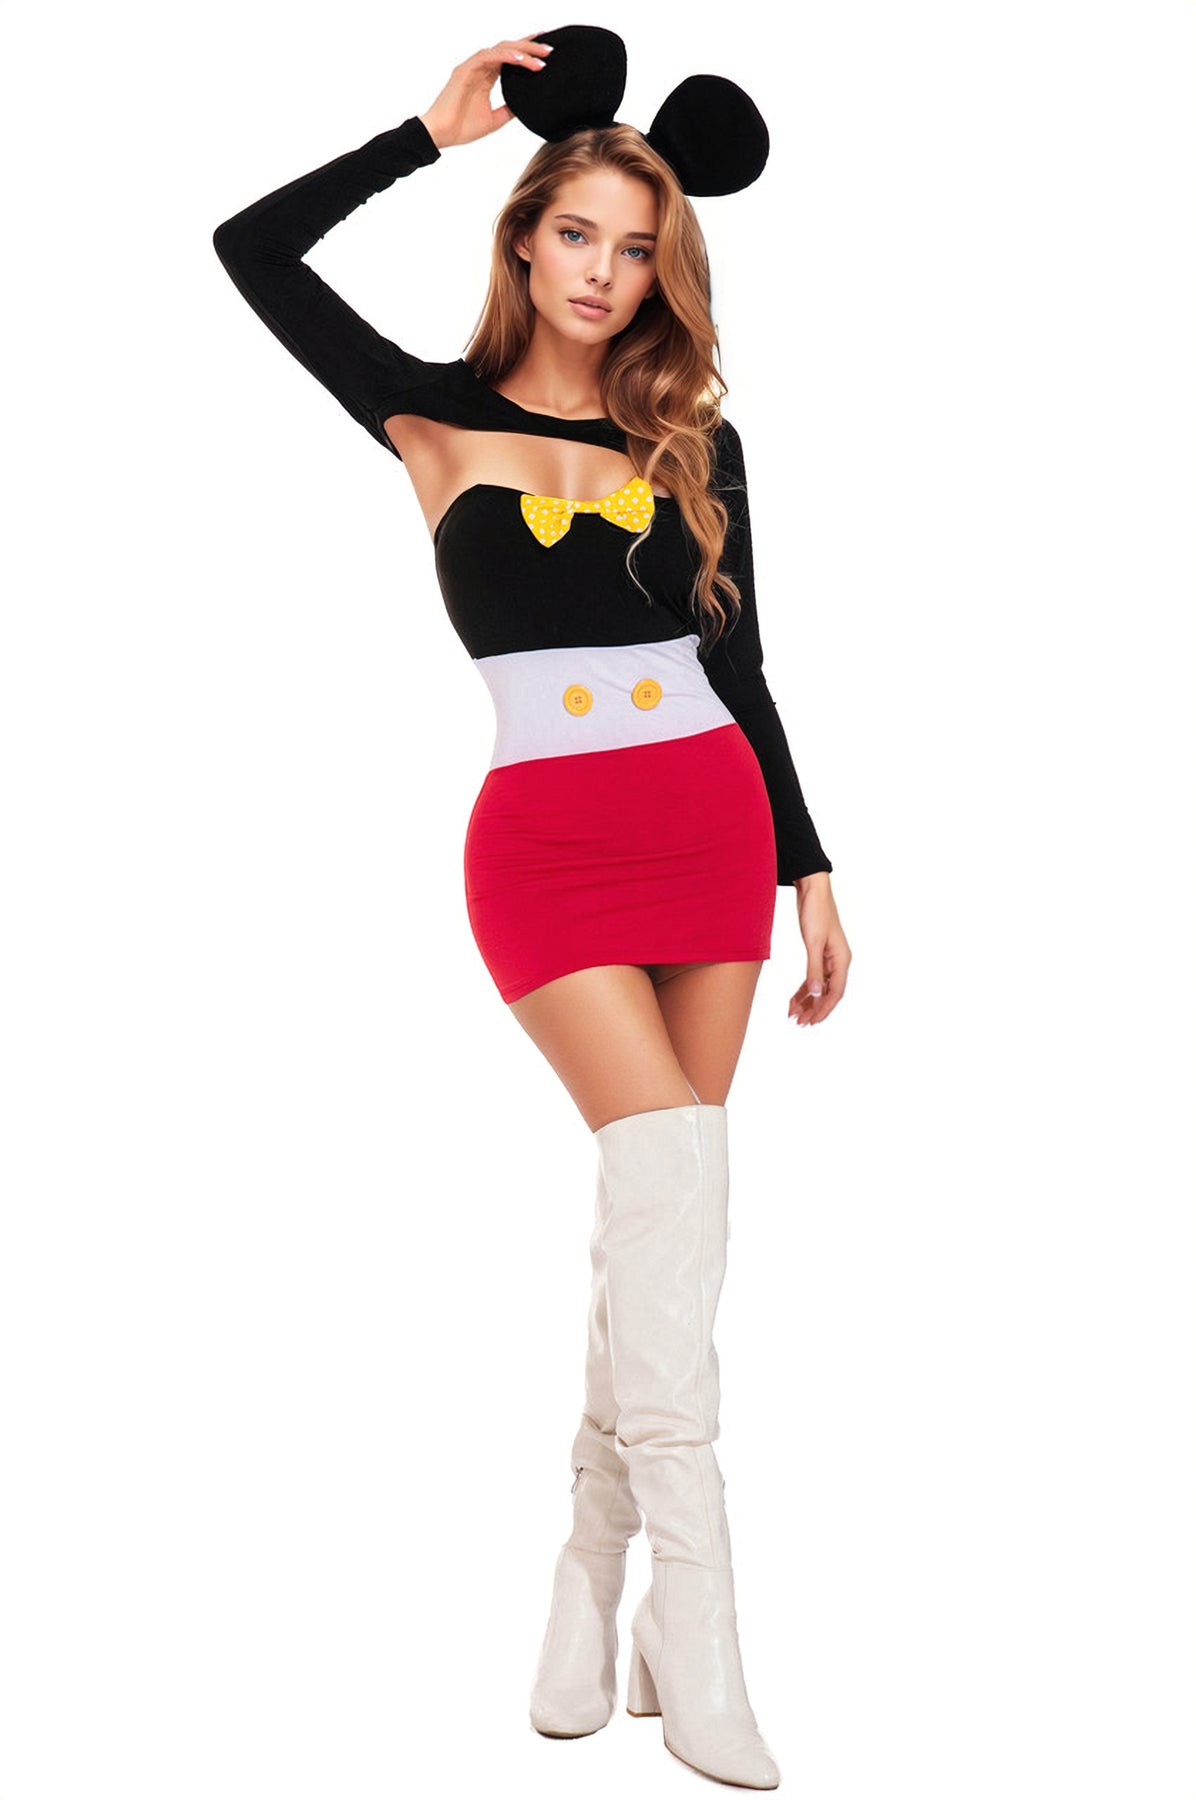 Mickey Mouse Costume Adult 